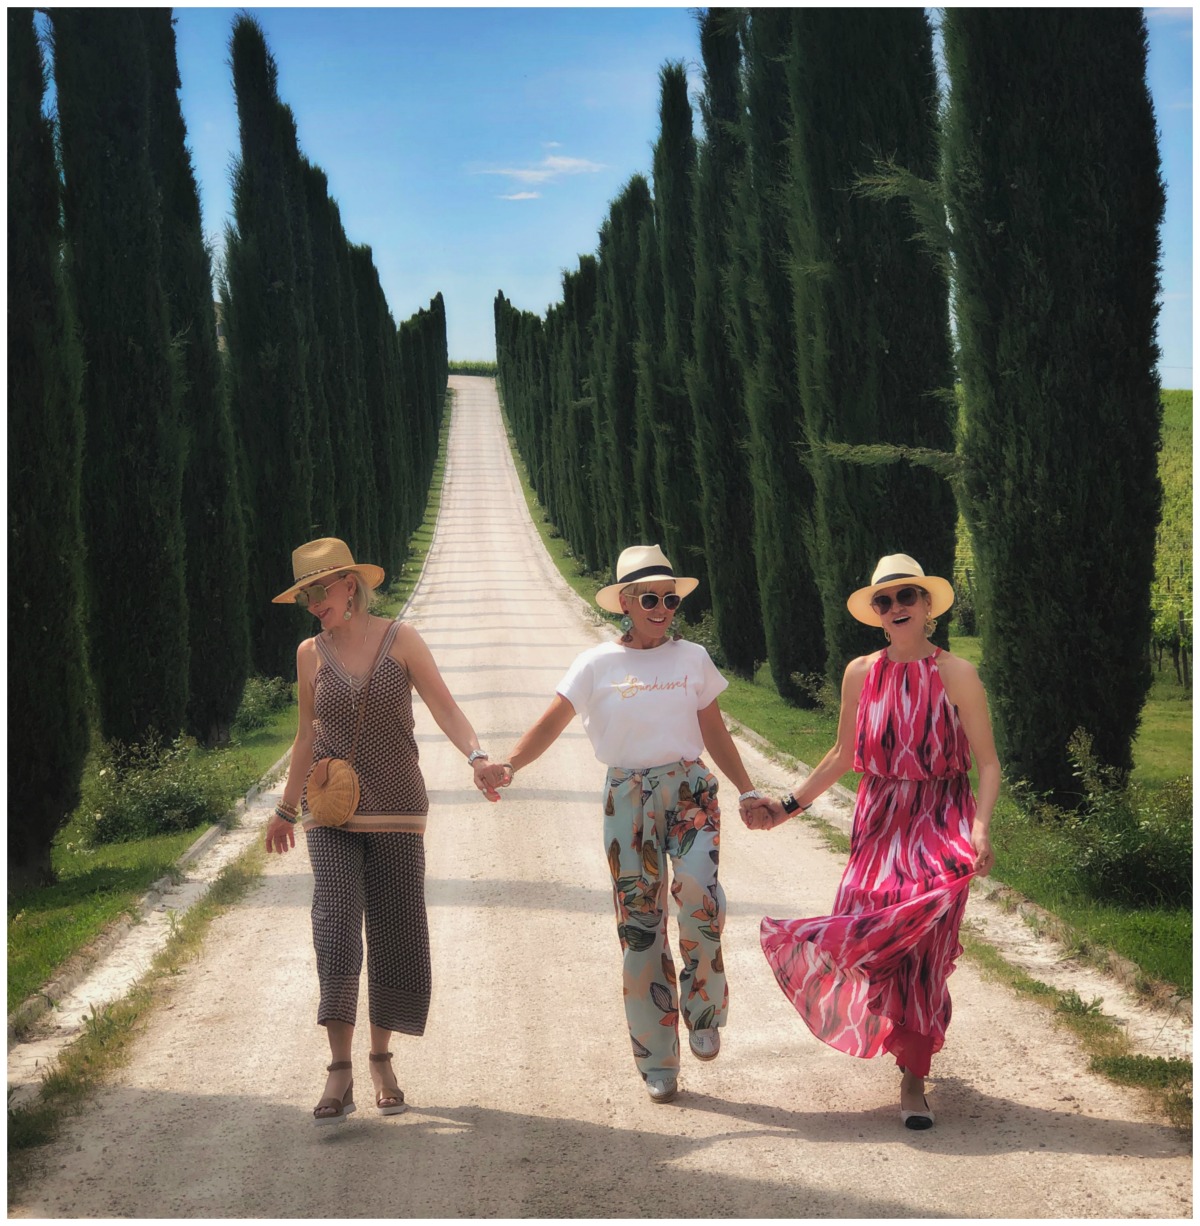 Road lined with Italian Cypress tress, SheShe Show, Chic Over 50, More Turquoise walking down the road